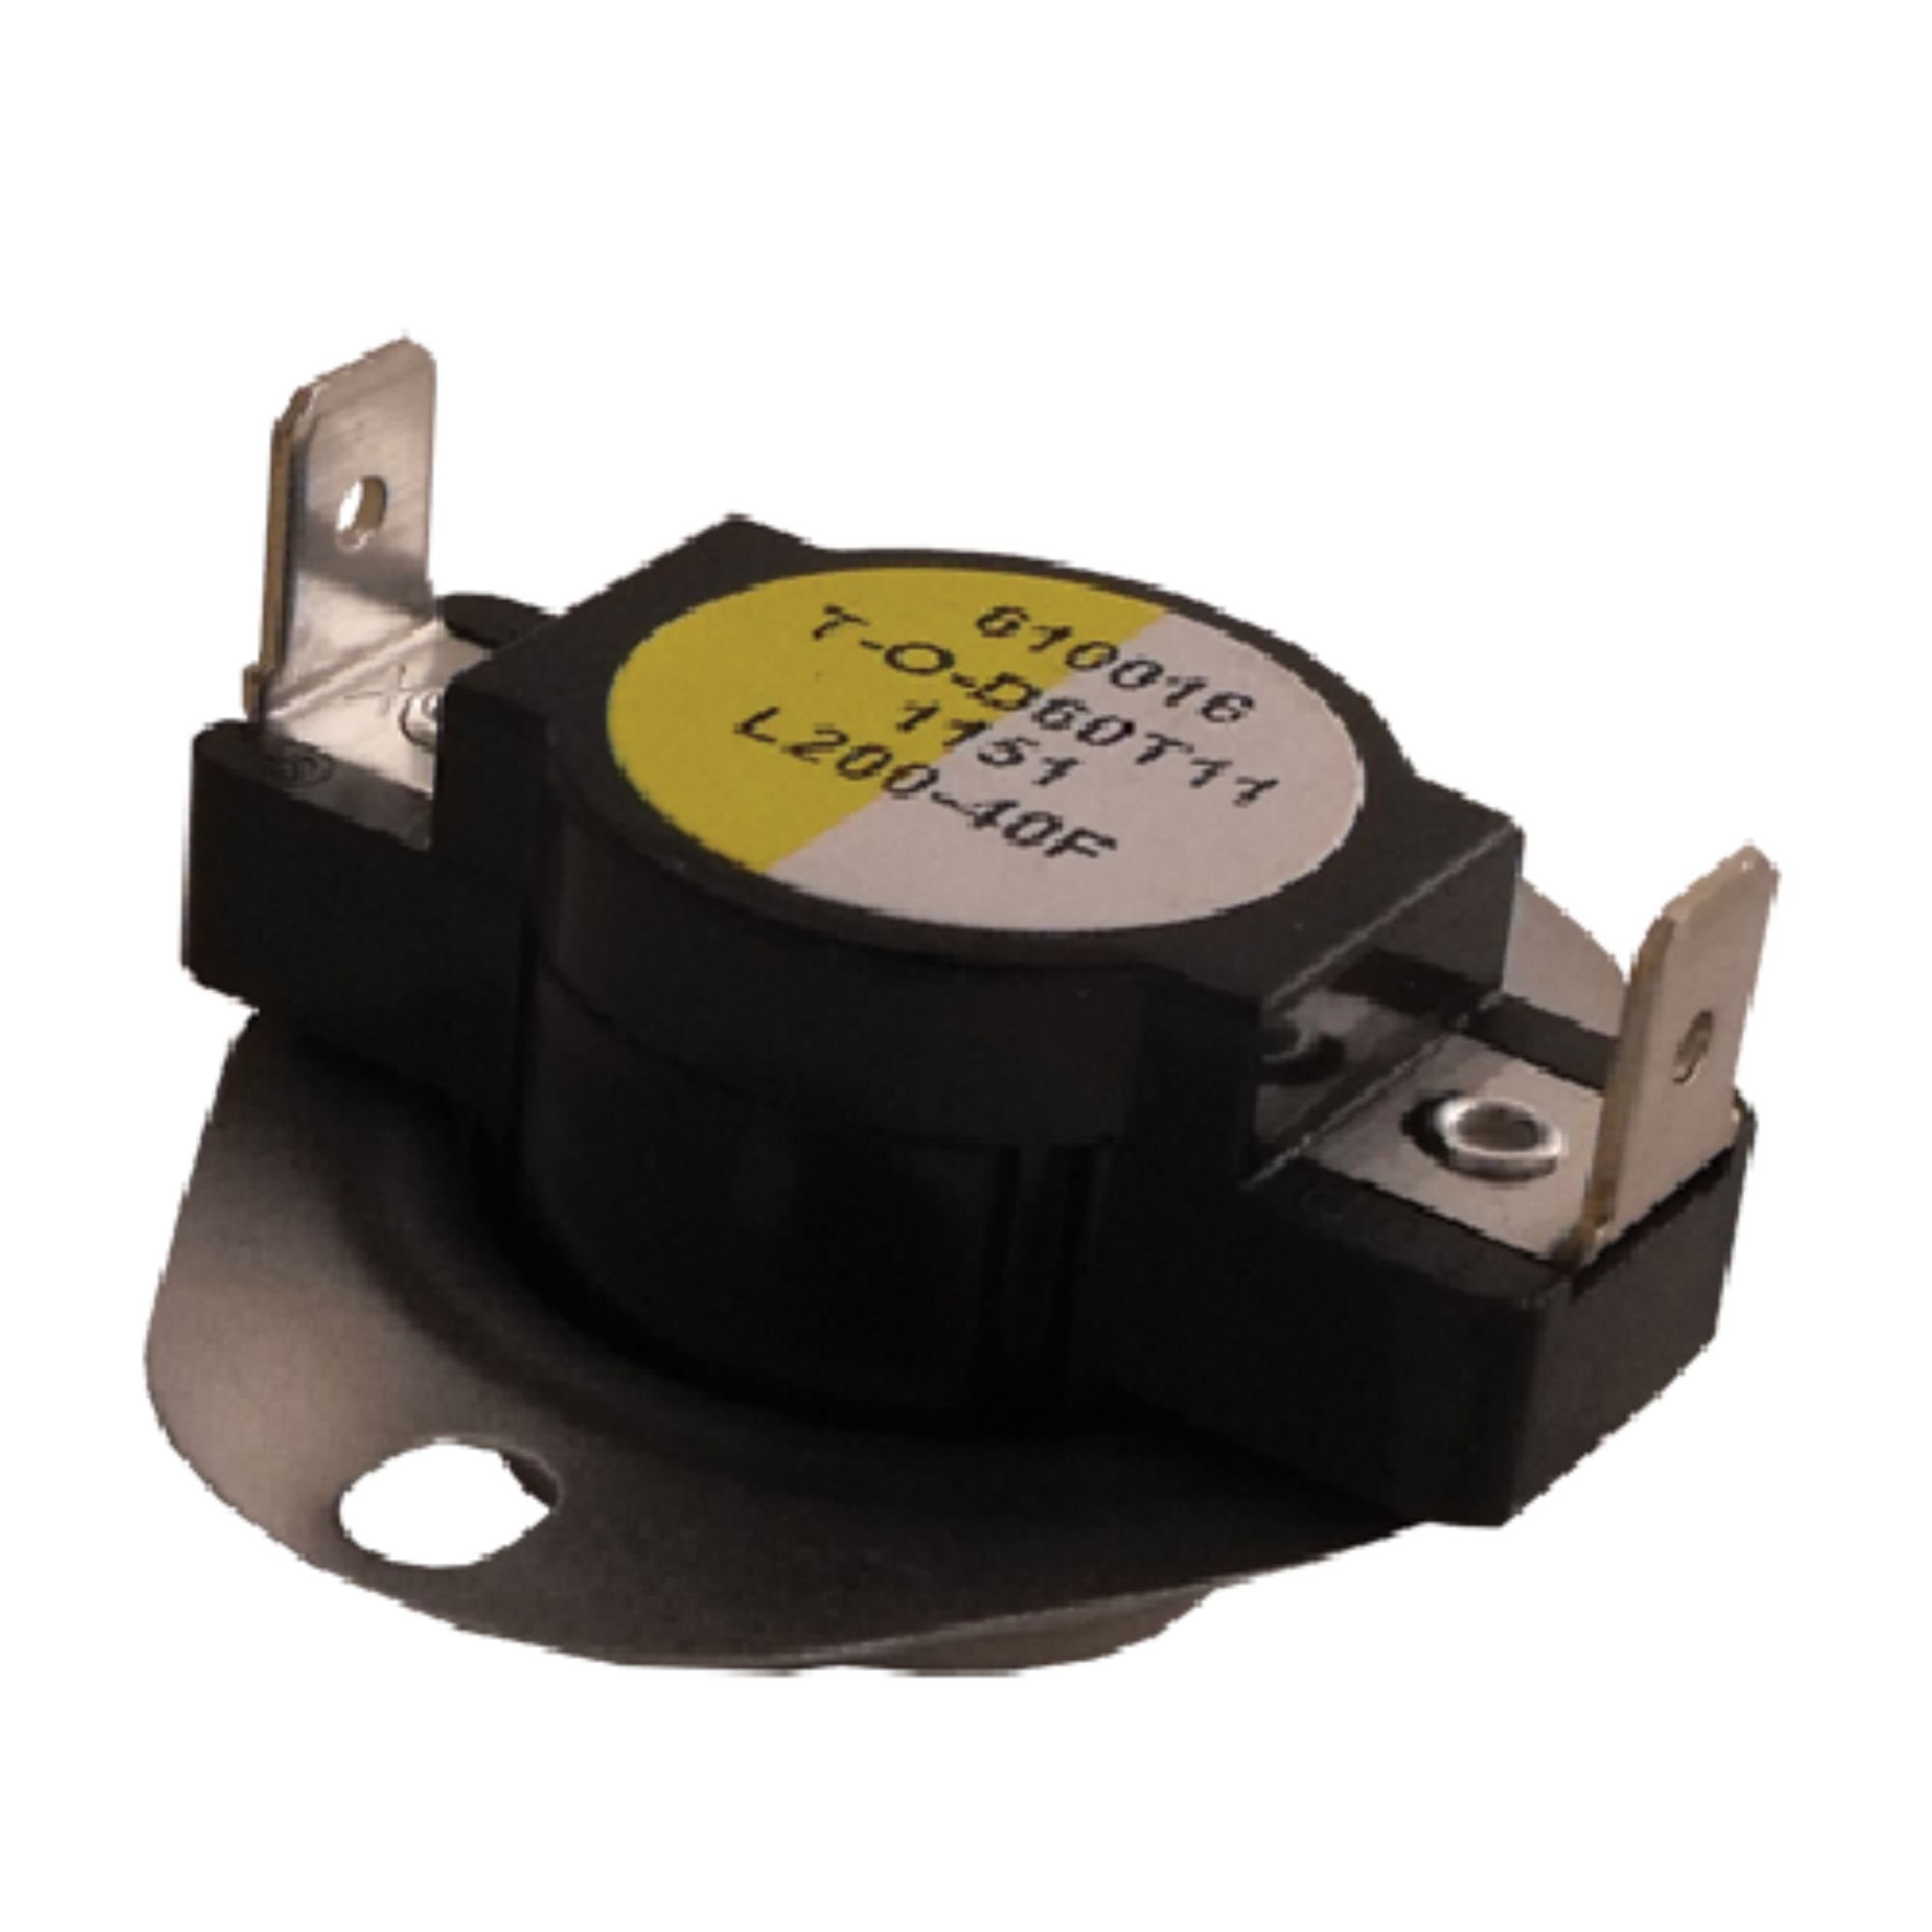 Supco Series L200 Thermostat 60T11 Style 610016